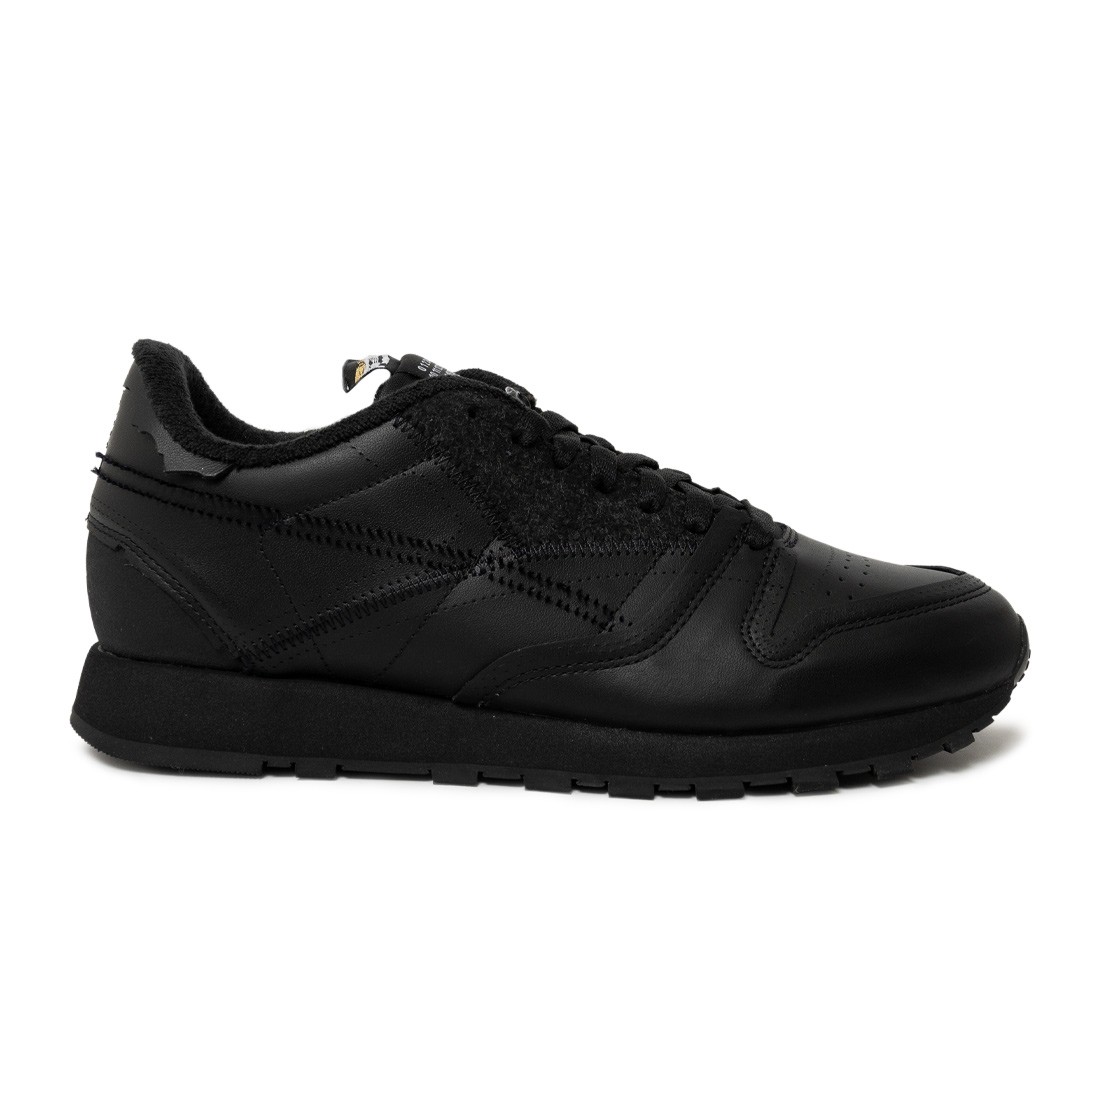 Reebok X Maison Margiela Project 0 Zs Sneakers in Black Womens Mens Shoes Mens Trainers Low-top trainers 